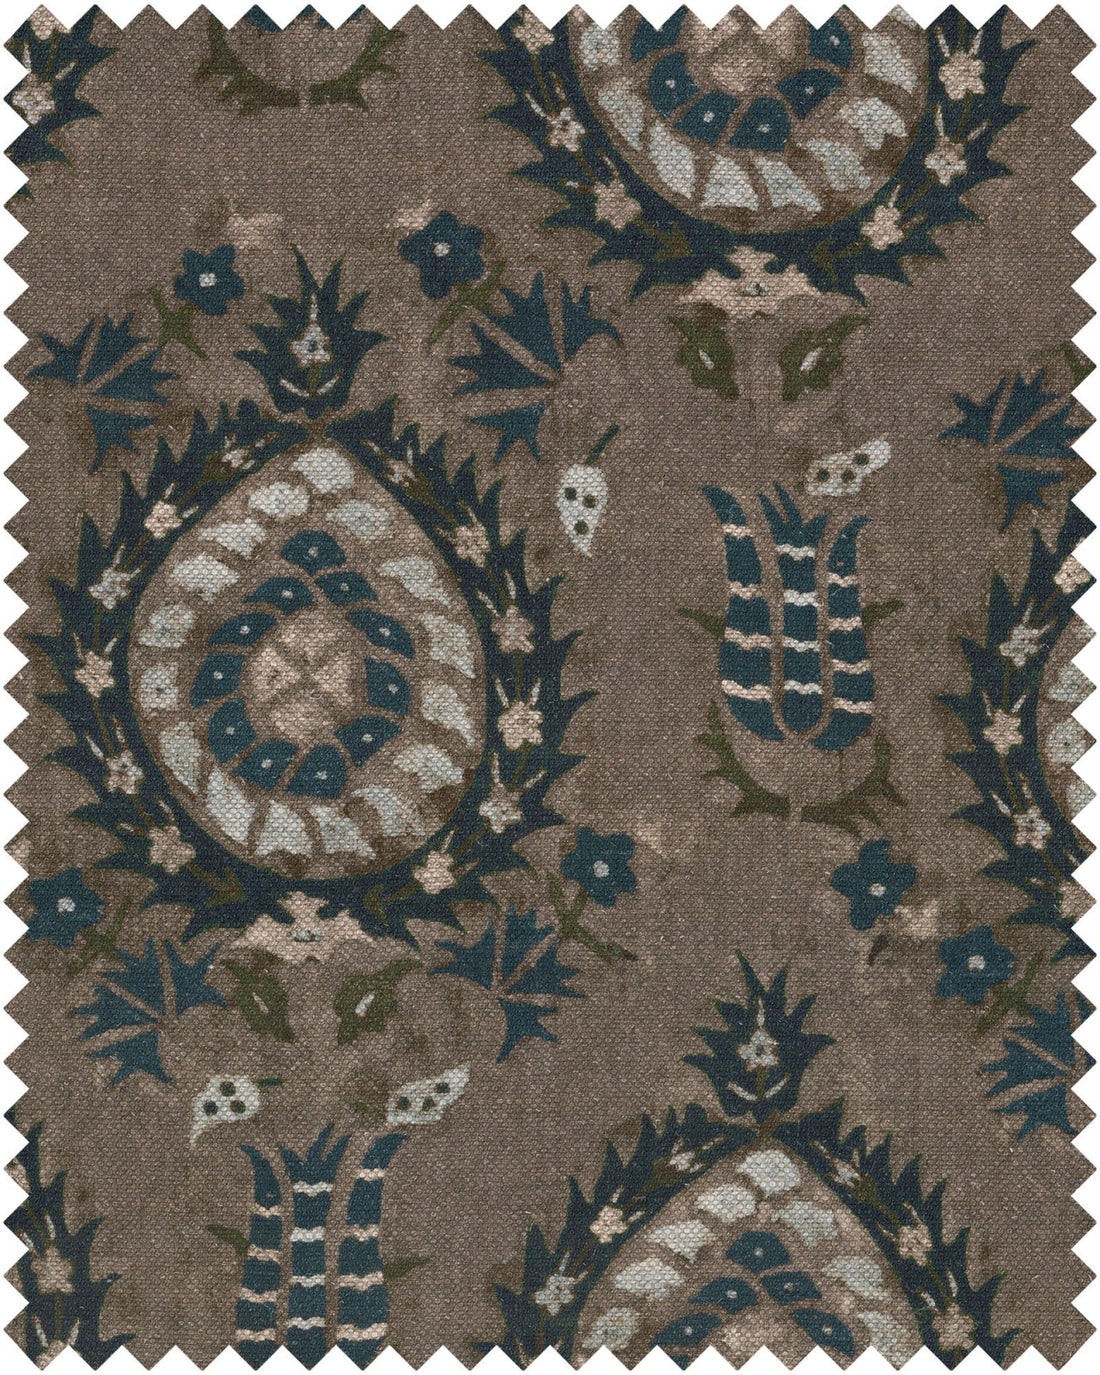 Flourish Dapple fabric in grey color - pattern number FB00037 - by Mind The Gap in the Transylvanian Roots collection